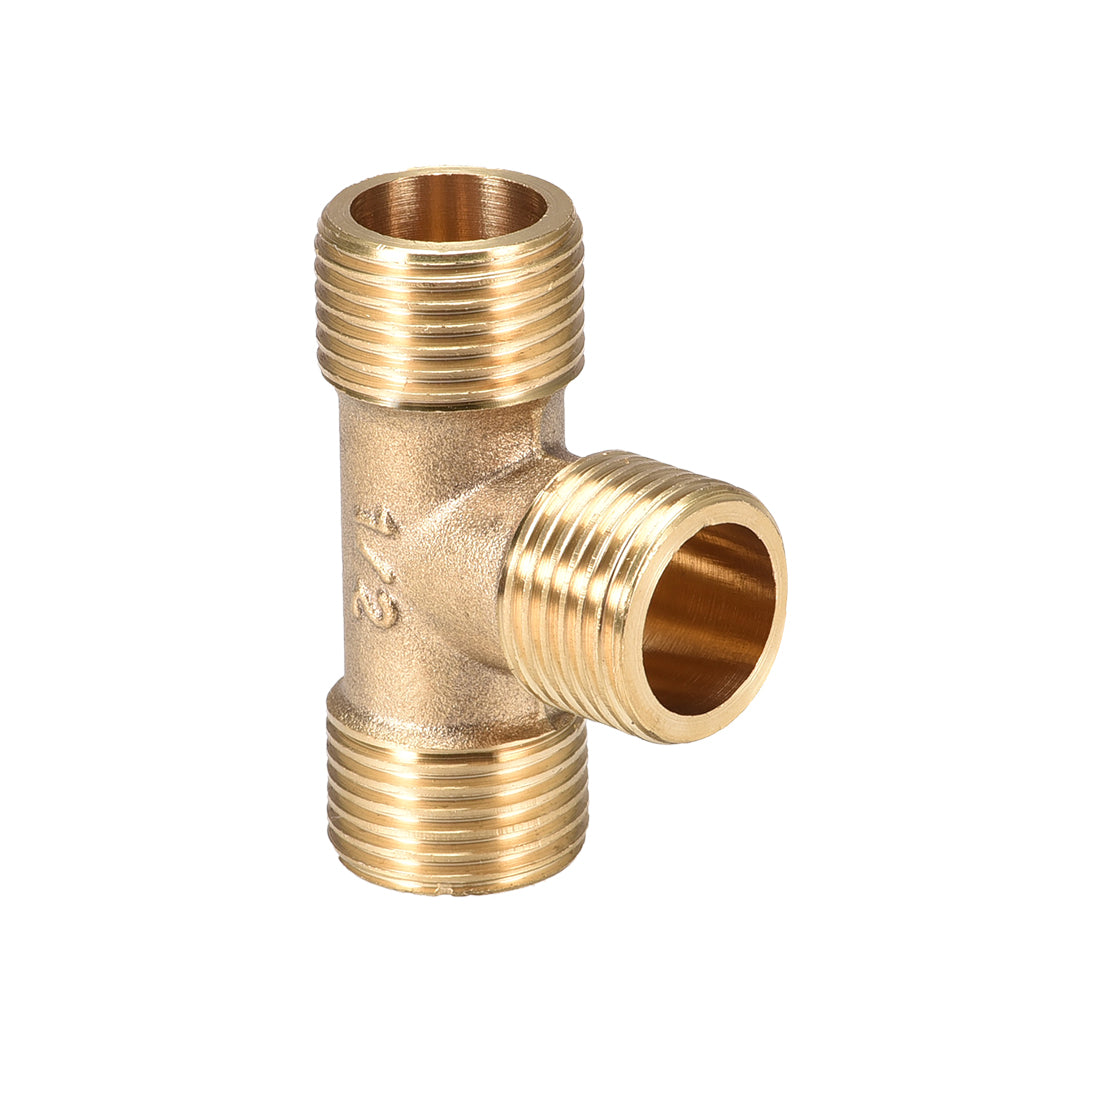 uxcell Uxcell Brass Tee Pipe Fitting G1/2 Male Thread T Shaped Connector Coupler